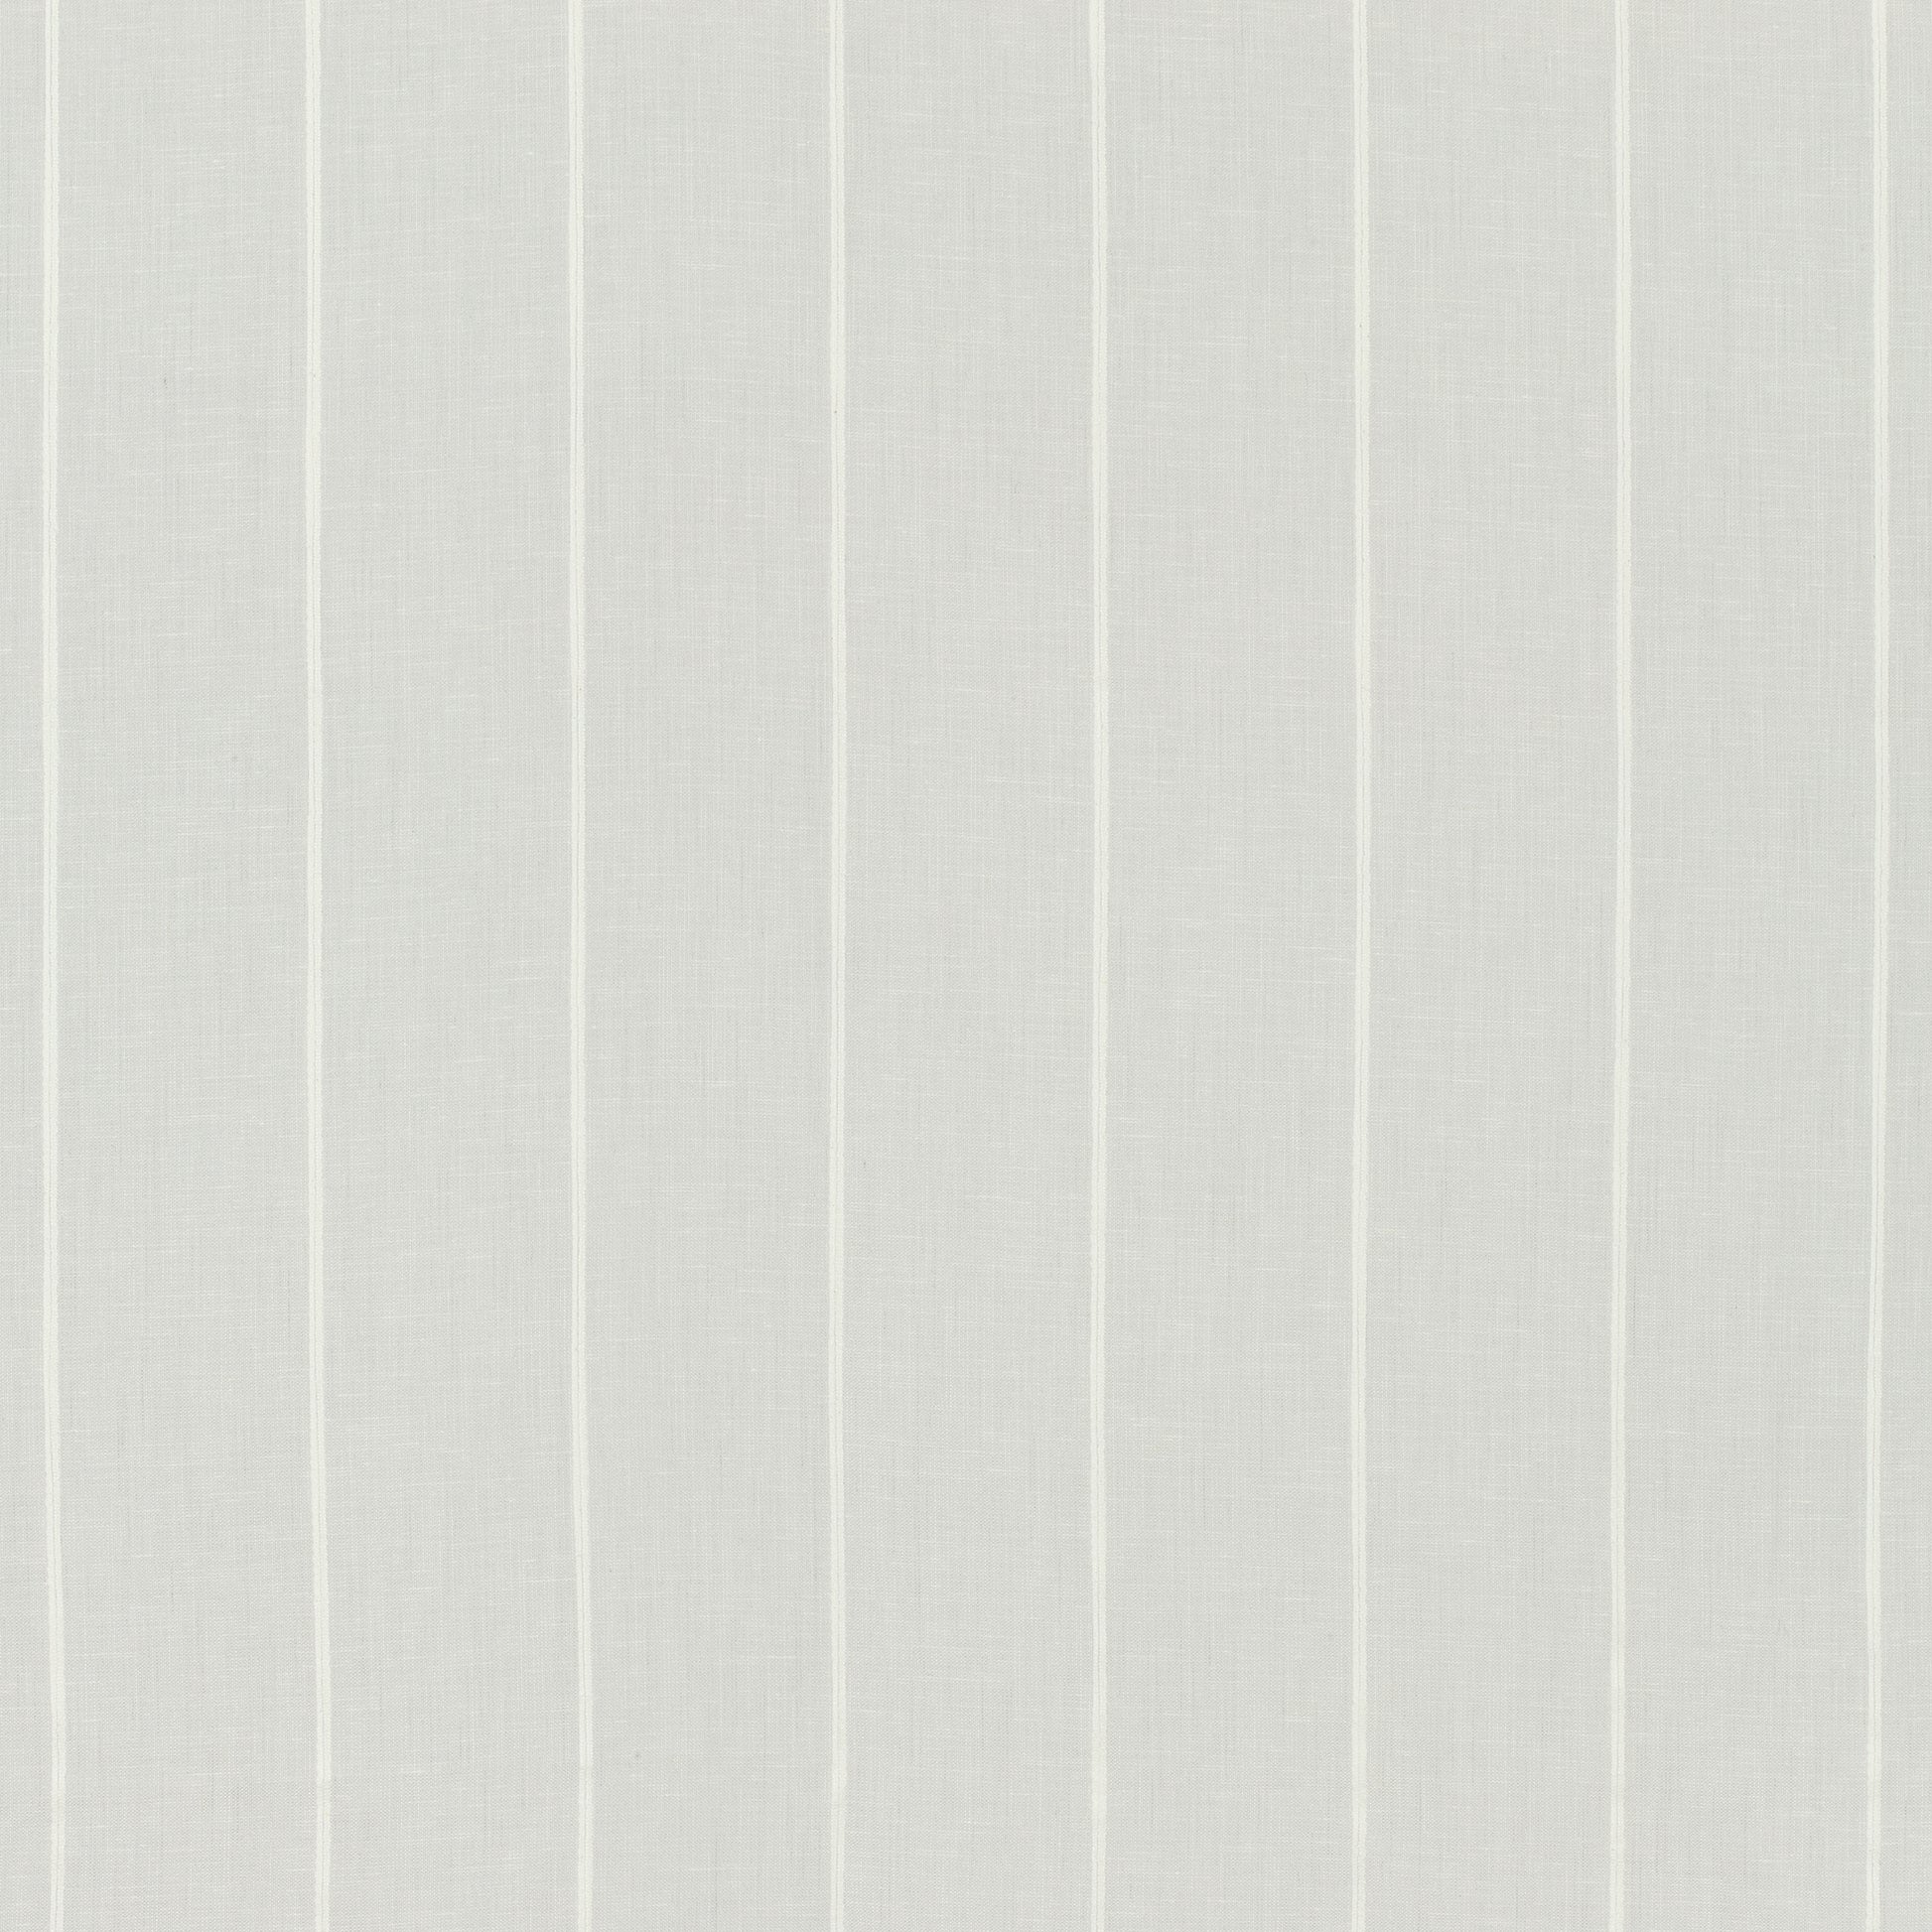 Purchase Thibaut Fabric Pattern number FWW7161 pattern name Berkshire Stripe color Ivory